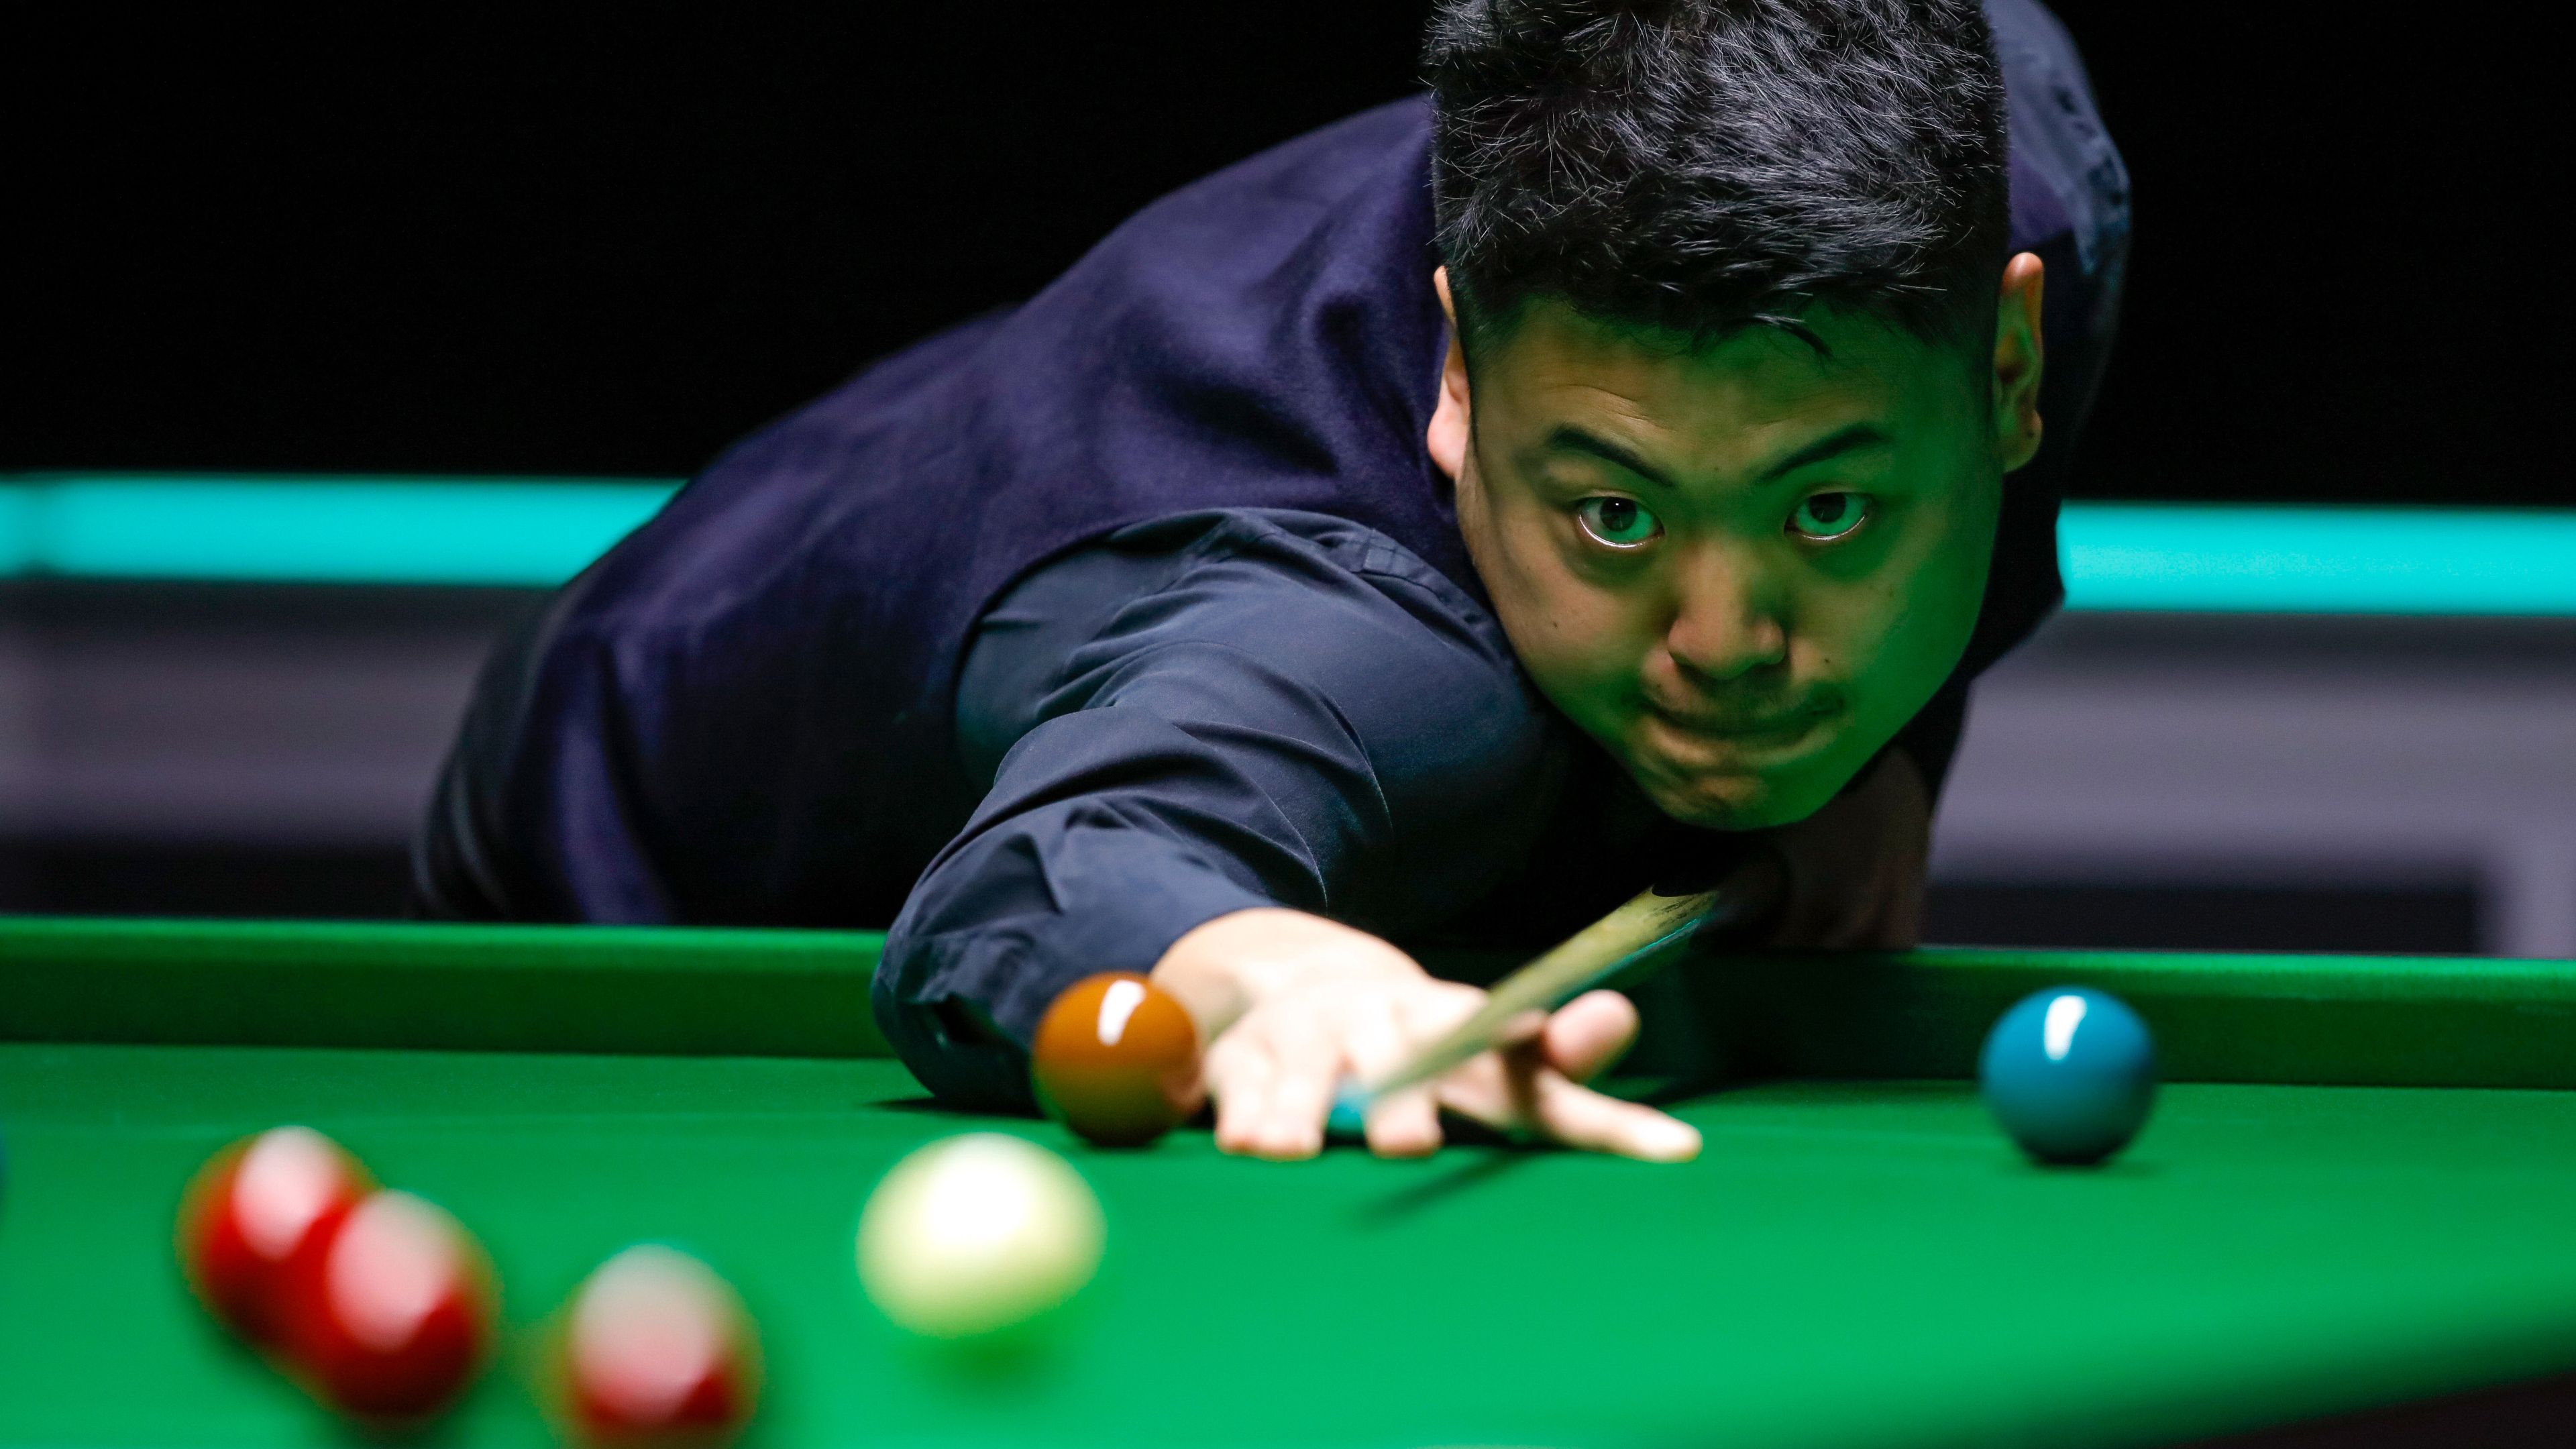 Ten Chinese professional snooker players charged after match-fixing probe